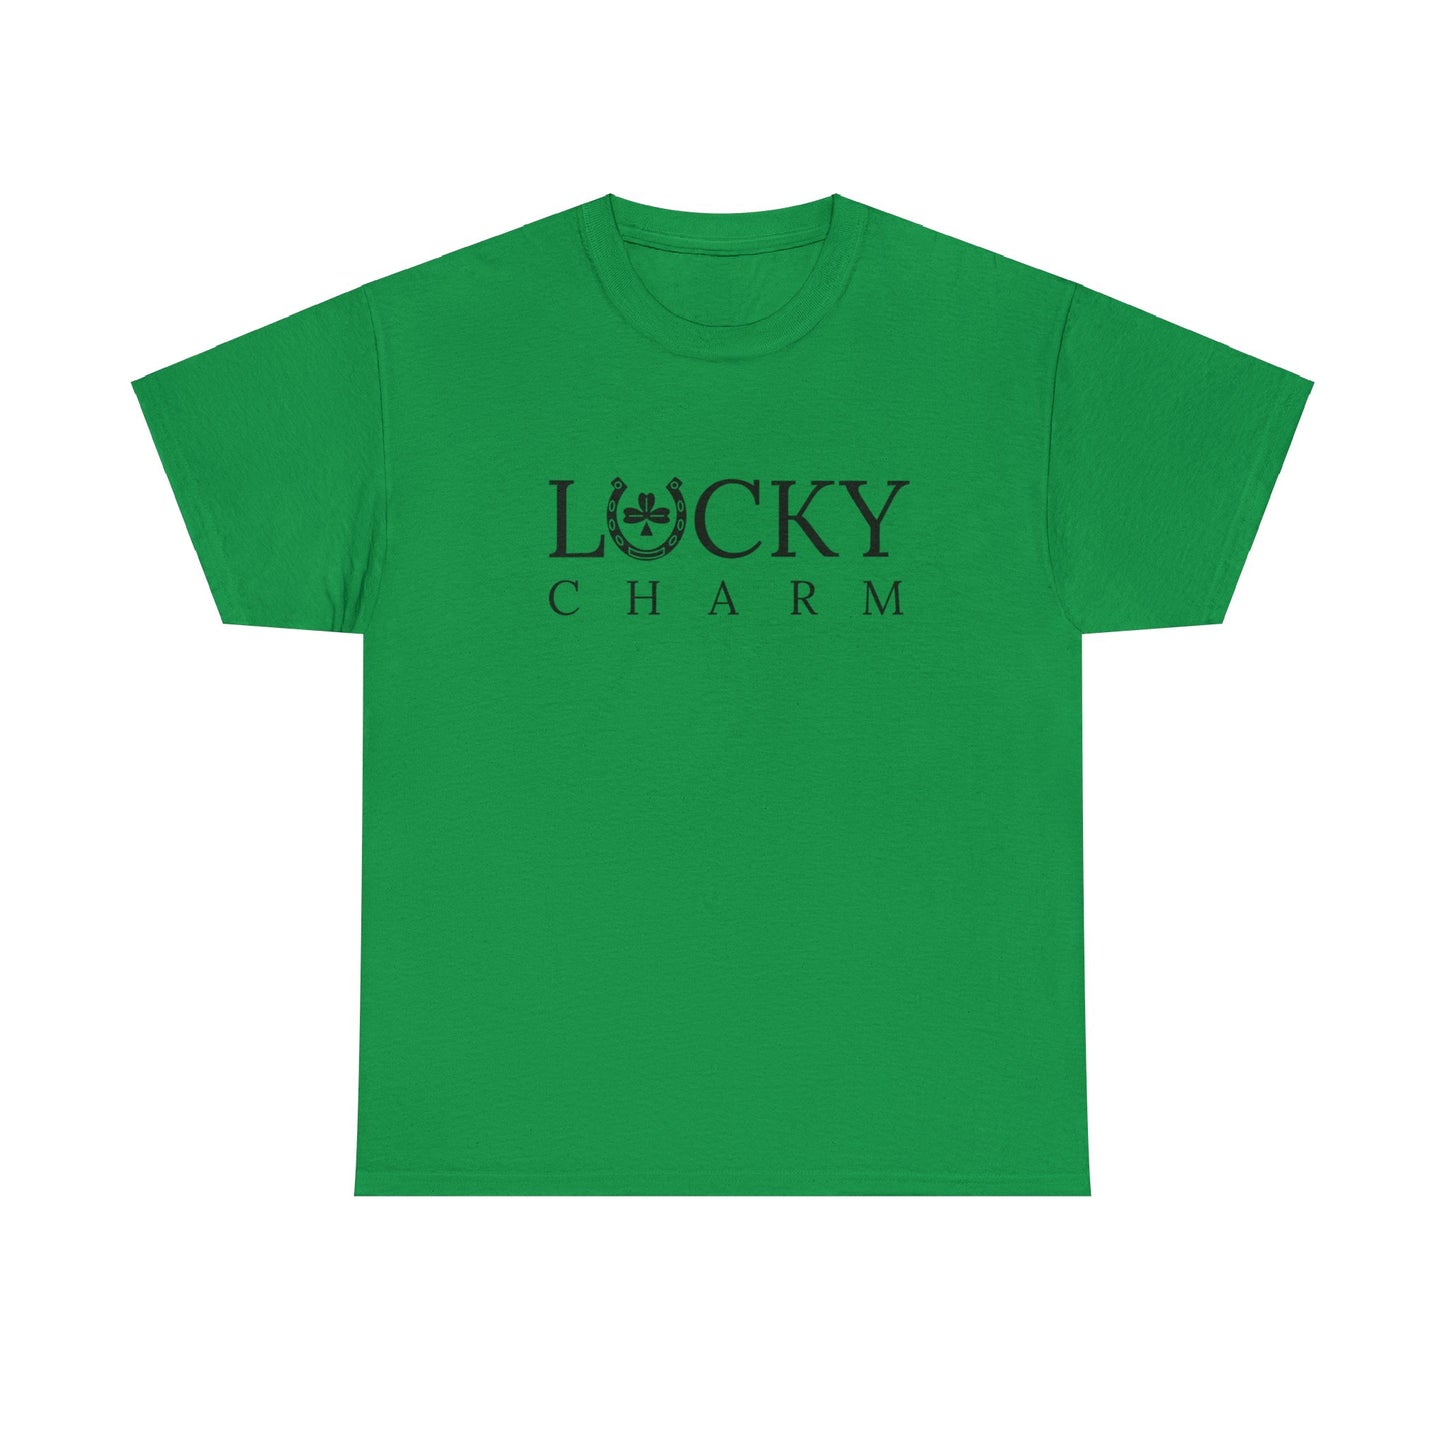 Lucky Charm T-Shirt For St. Patrick's Day TShirt for St. Paddy's Day Tee